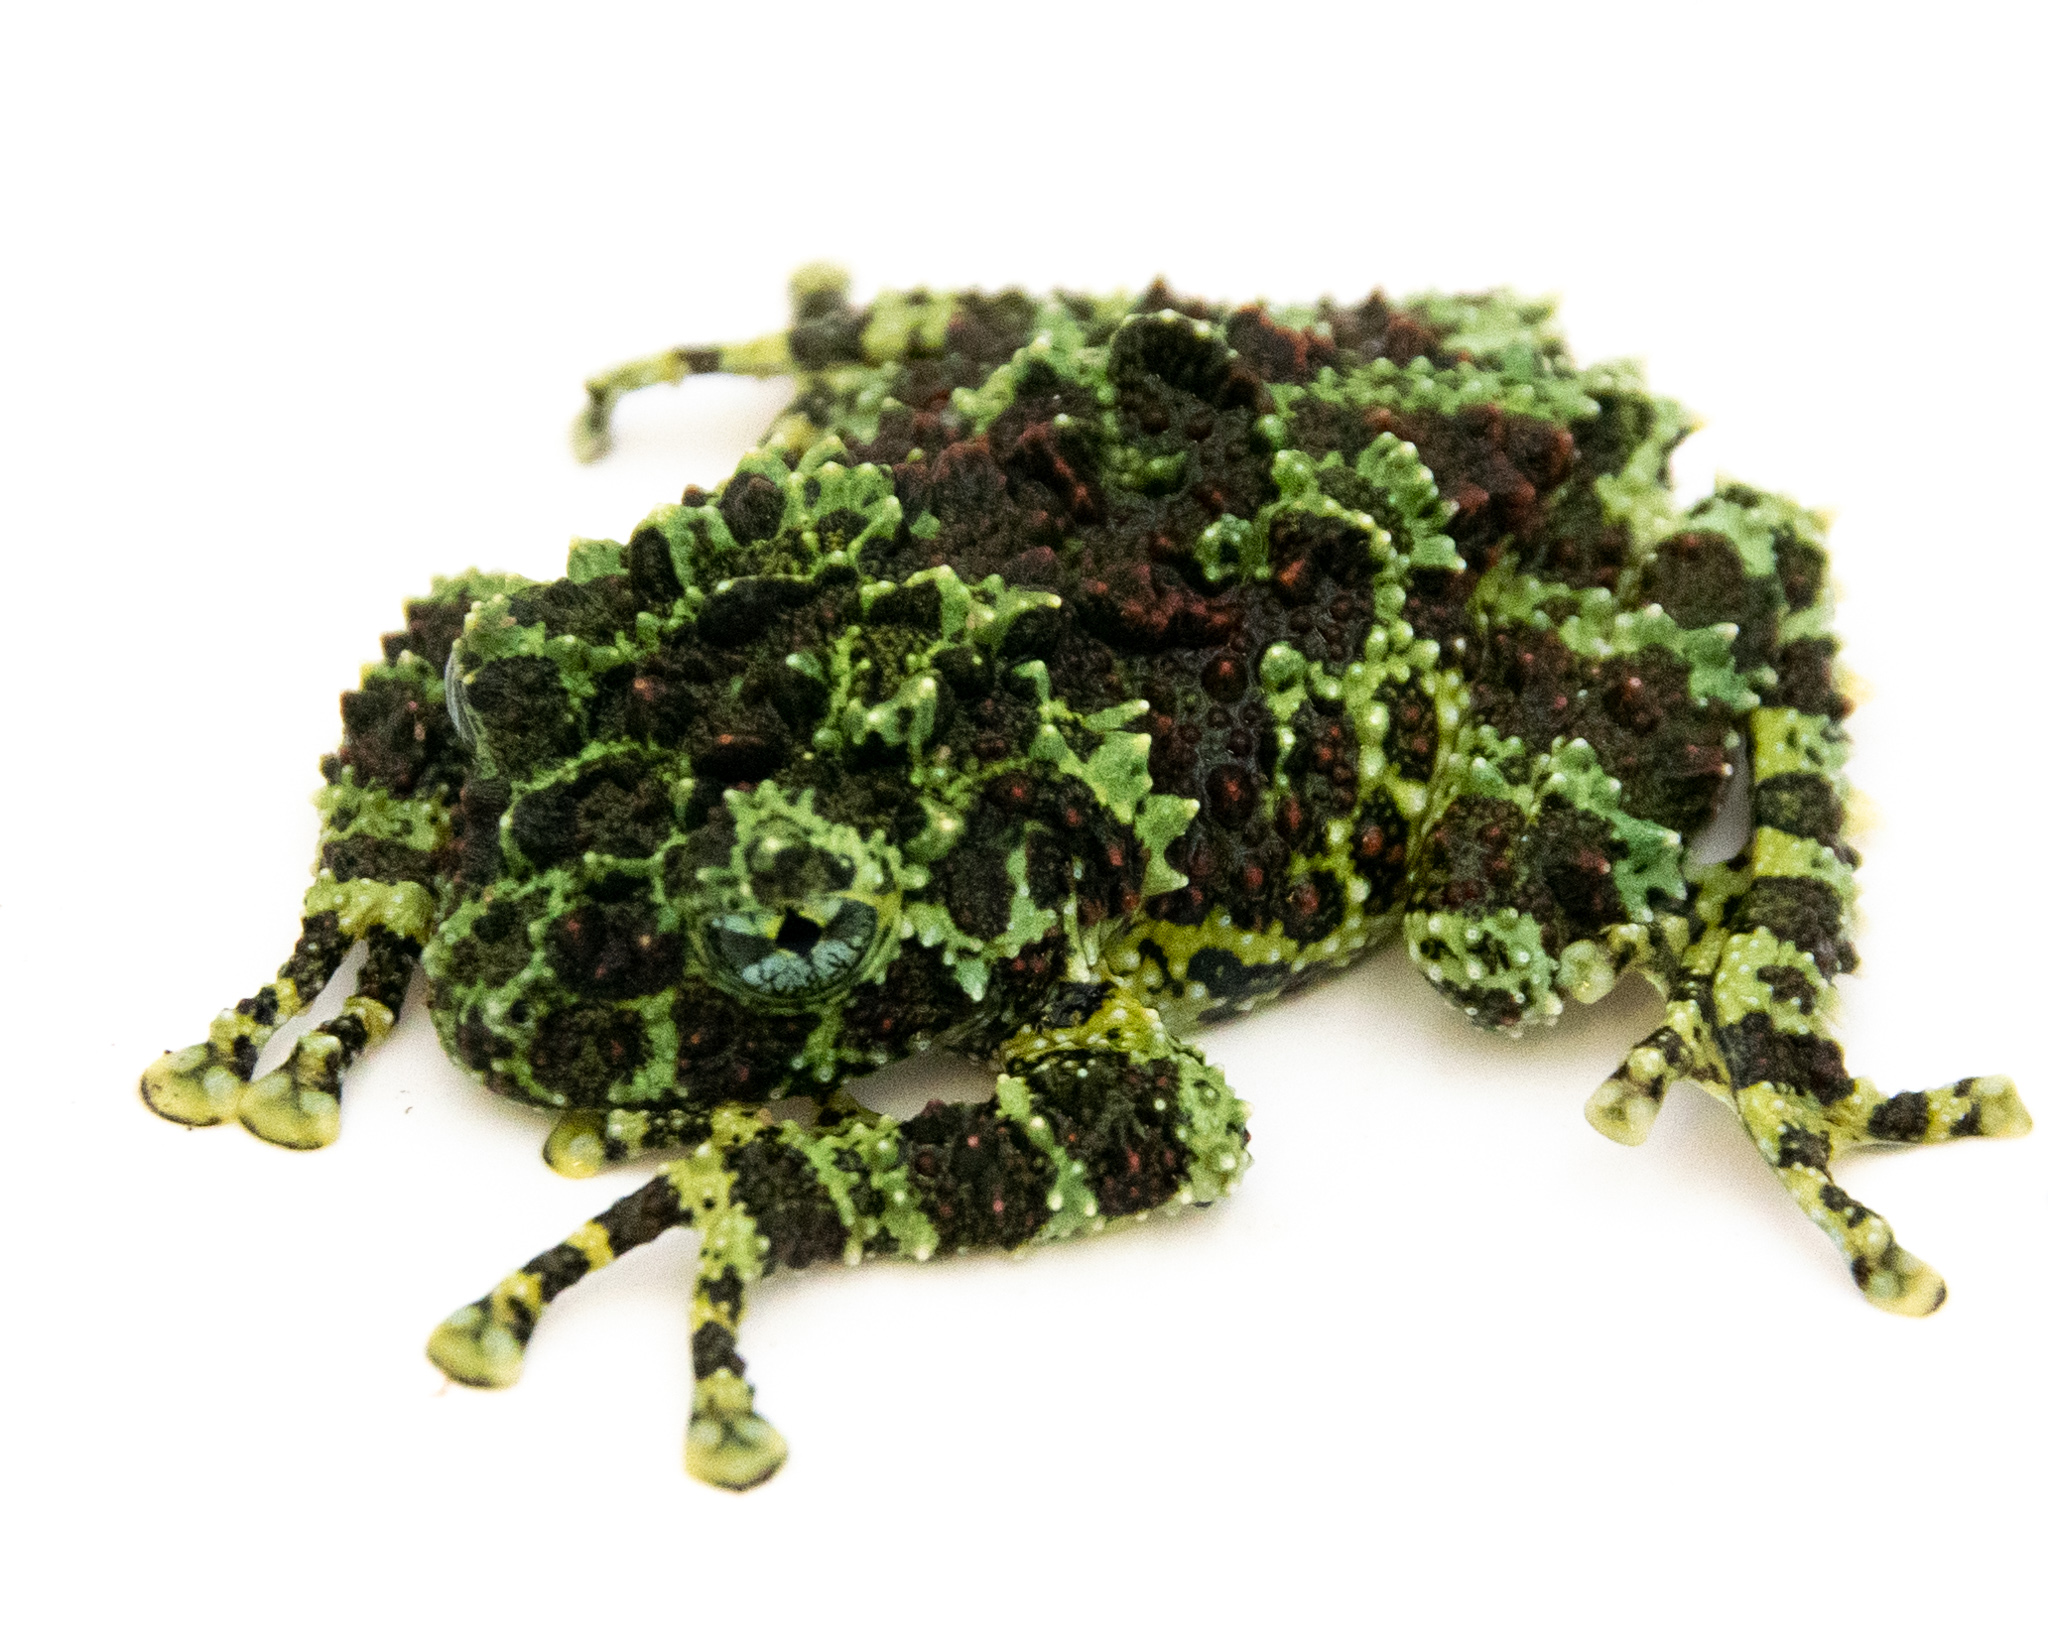 Theloderma corticale - Grenouille mousse